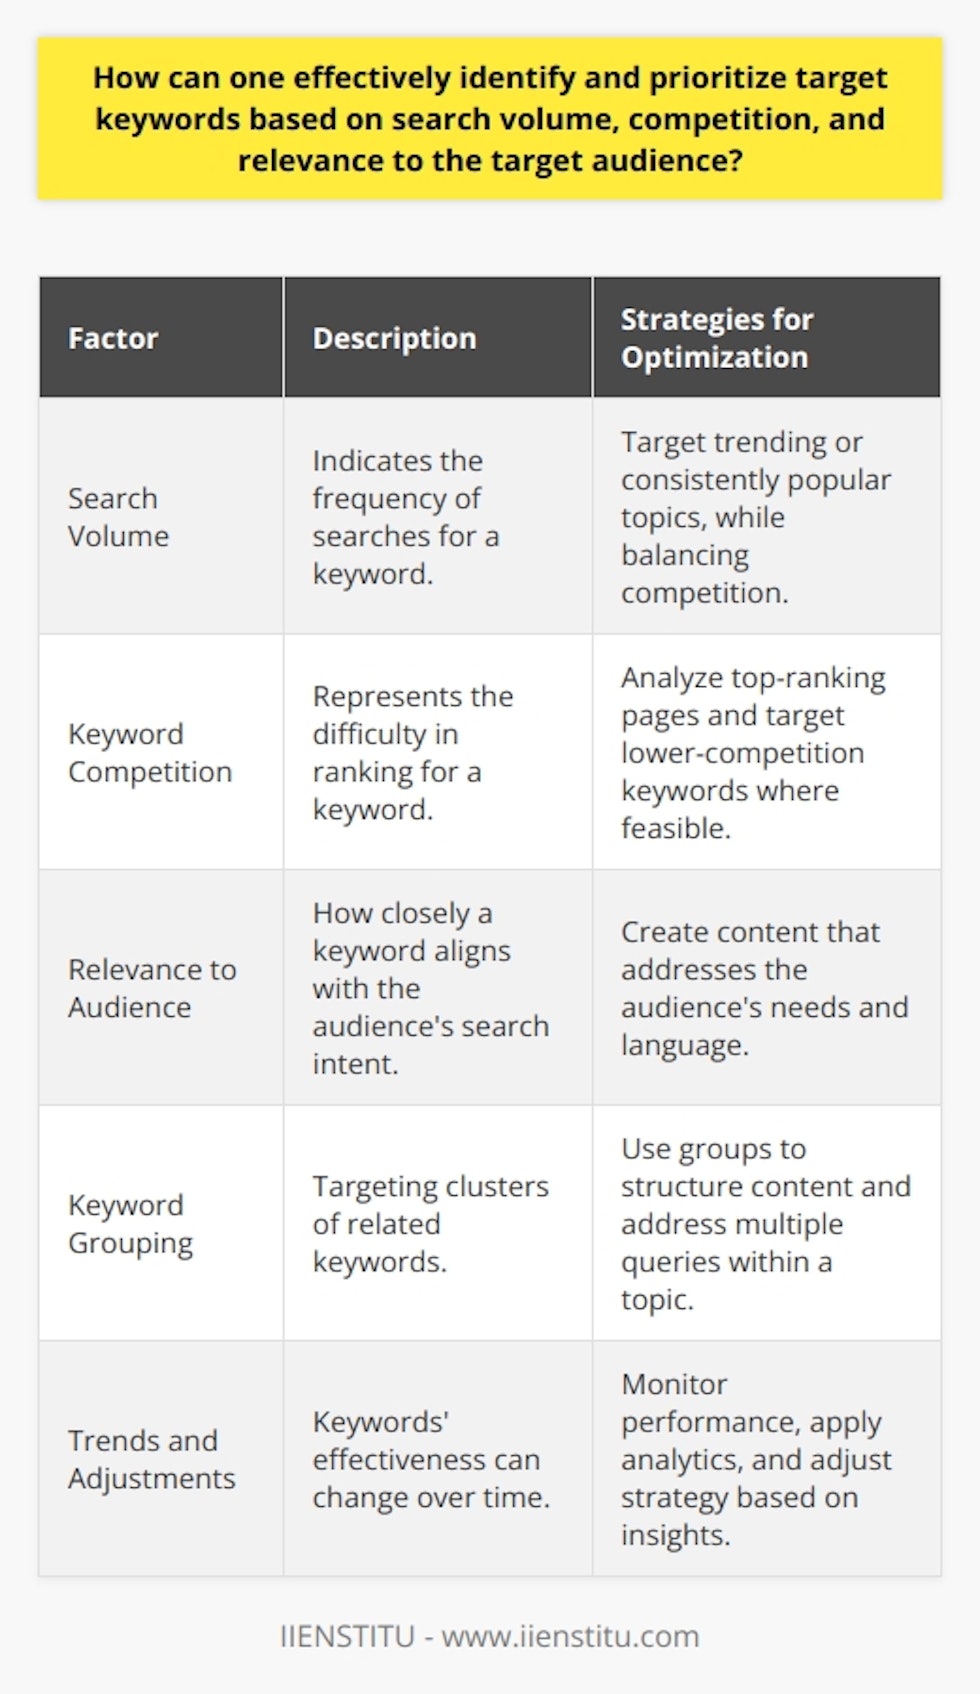 Identifying and prioritizing target keywords is a nuanced task that involves balancing search volume, competition, and relevance to effectively capture the attention of your target audience. Here's how one can navigate this process:Understanding Search VolumeSearch volume is a critical metric that signifies how often a keyword is entered into search engines. Keywords with a high search volume indicate that they are common terms users are seeking information on. Tools that provide keyword search volume help in understanding which topics are trending or have a steady interest over time. However, focusing solely on search volume might lead you to highly competitive keywords that are challenging to rank for.Assessing Keyword CompetitionThe level of competition for a keyword is a clear indicator of how hard it may be to rank well for that term. Highly competitive keywords are often dominated by well-established sites with strong domain authority. Smaller blogs or websites might find it more strategic to target lower-competition keywords where they have a realistic chance of reaching the top of search results. You can gauge competition by analyzing the strength of current top-ranking pages, looking at their link profiles, content quality, and domain authority.Evaluating Relevance to AudienceRelevance is the linchpin of effective keyword targeting. If a keyword isn't closely aligned with what your target audience is looking for, even high search volumes and low competition won't translate into success. Understanding your audience's language, pain points, and search intent is vital. Keywords should reflect the solutions or insights your content offers to the audience's queries or needs. By creating user-centric content, you increase the likelihood of higher engagement and conversion rates.Implementing Keyword GroupingRather than targeting individual keywords, grouping similar keywords can help you address a broader range of search queries within a topic. This approach not only improves SEO but also guides you in the creation of better-structured and more informative content. Grouped keywords should be used to guide the subsections of your content, ensuring that you cover a topic comprehensively.Monitoring Trends and AdjustmentsThe digital landscape and user behavior are always in flux, which means keyword effectiveness can shift over time. It's crucial to keep an eye on how keywords perform and evolve your keyword strategy accordingly. Use analytics to track your content’s performance and refine your keywords in response to data-driven insights. Recognizing when keywords are gaining or losing traction can help you stay ahead of the curve and maintain the relevance of your content.In summary, a strategic approach to keyword identification and prioritization involves understanding the balance between search volume, competition, and relevance, while also applying techniques like keyword grouping and ongoing trend analysis. This multi-angle analysis helps ensure that the content you produce is more likely to resonate with your audience and perform well in search engine rankings. Remember, the objective is not just to attract traffic but to engage the right visitors who find value in what your blog offers.